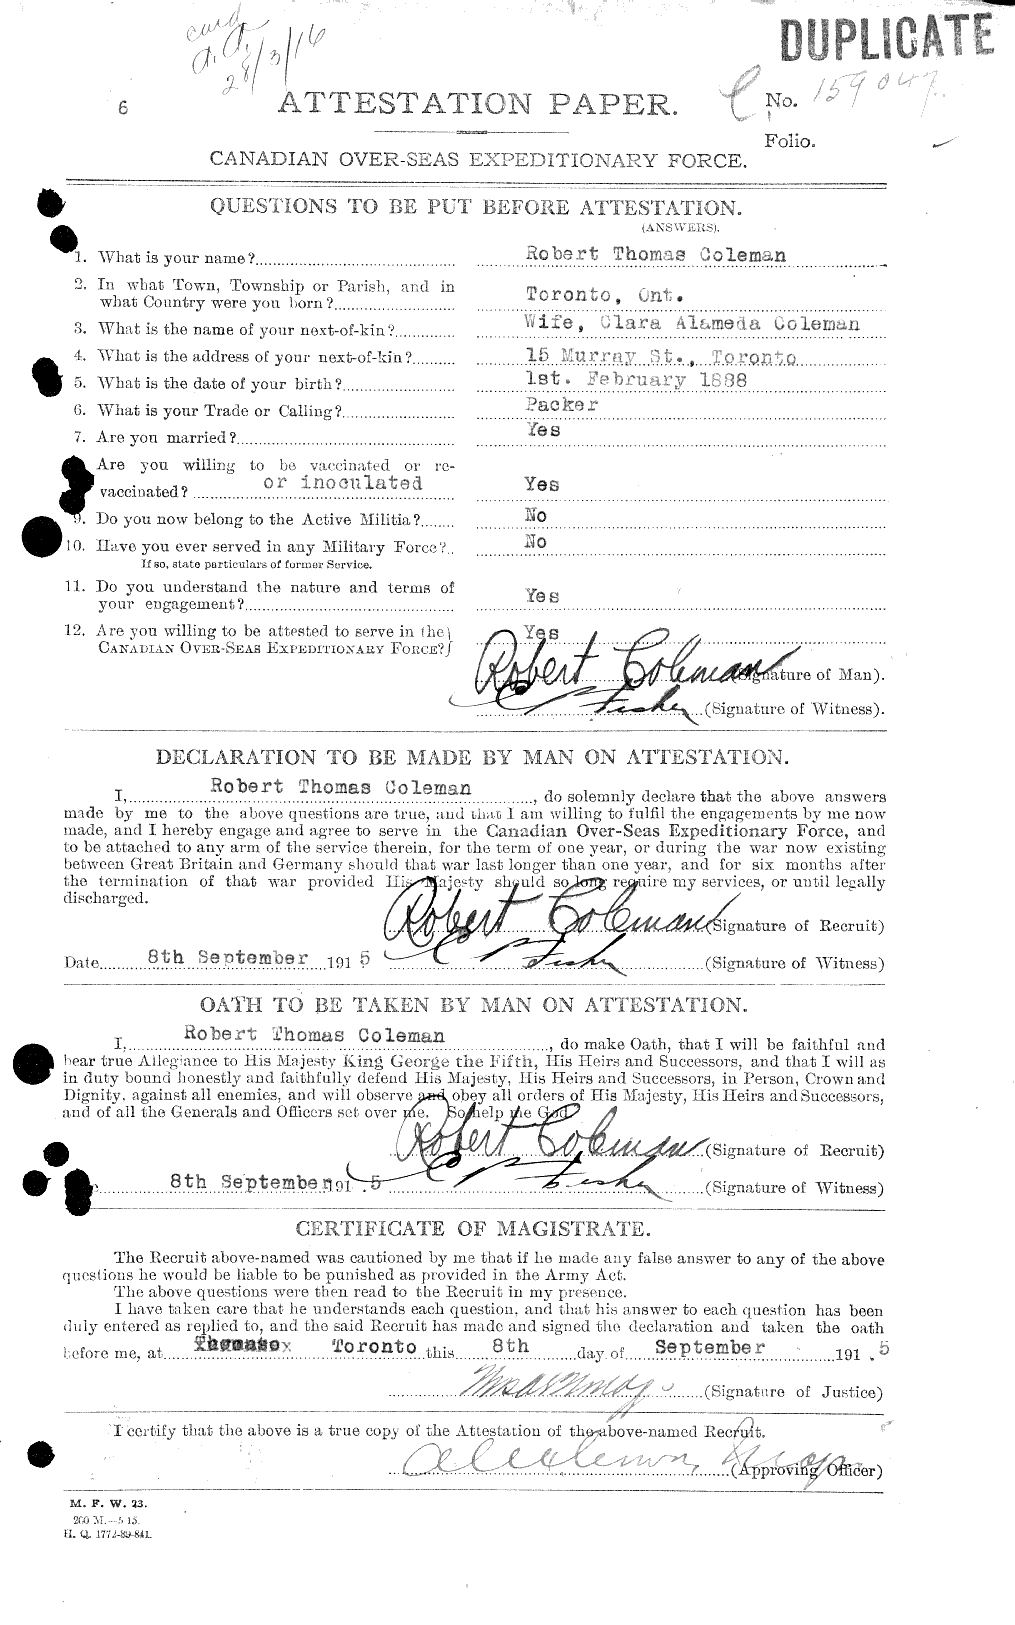 Personnel Records of the First World War - CEF 028262a